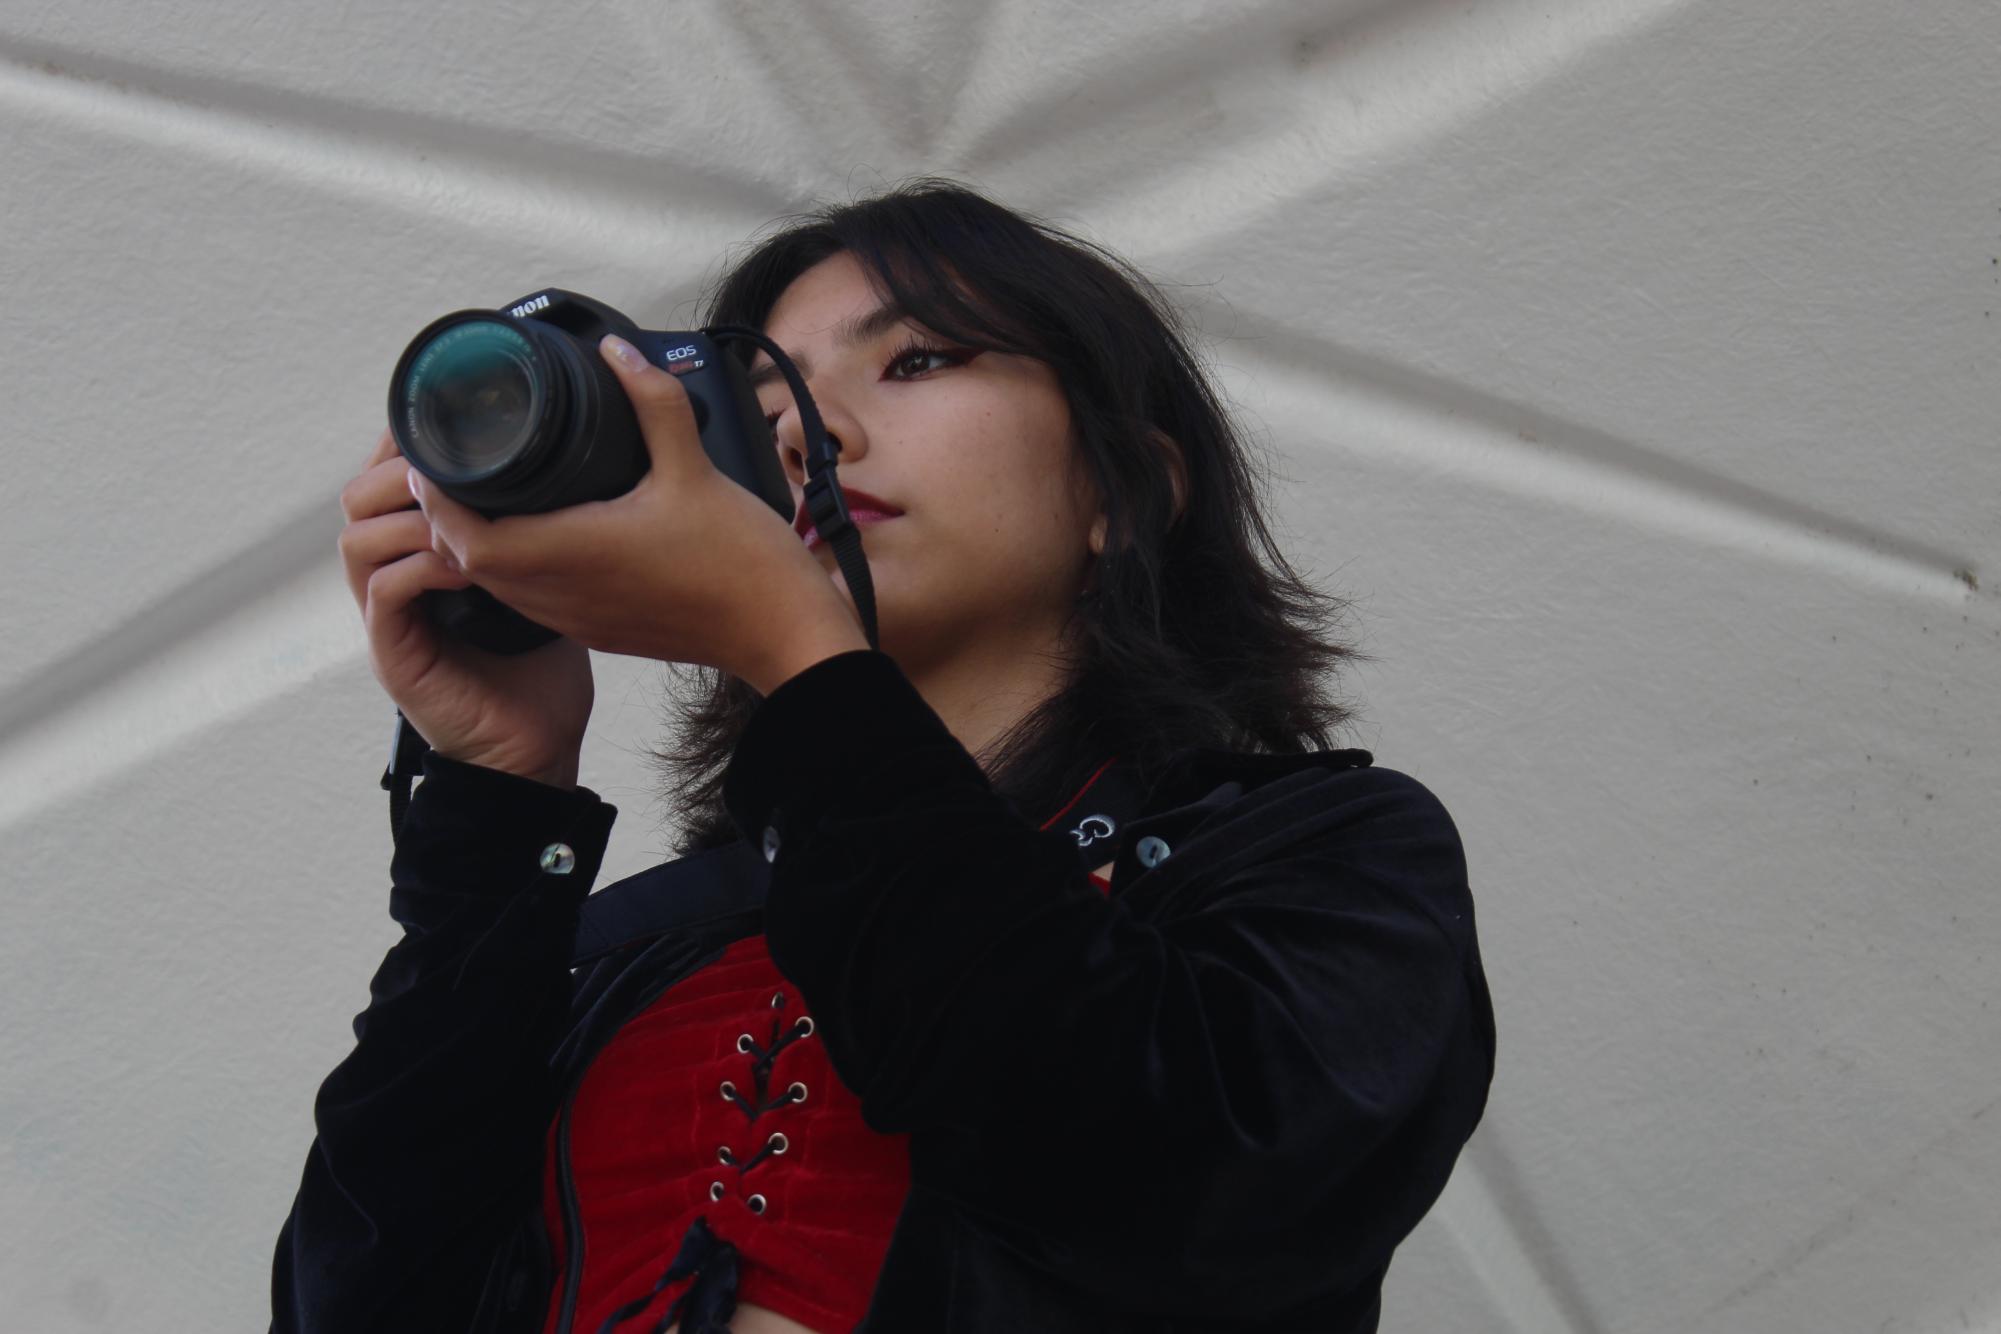 Junior Alia Galvan adjusts a camera to take a photo from overhead on Sept. 22. Photography principles like “bird’s eye view” were reviewed in the courtyard for the period 1 experimental photography class.